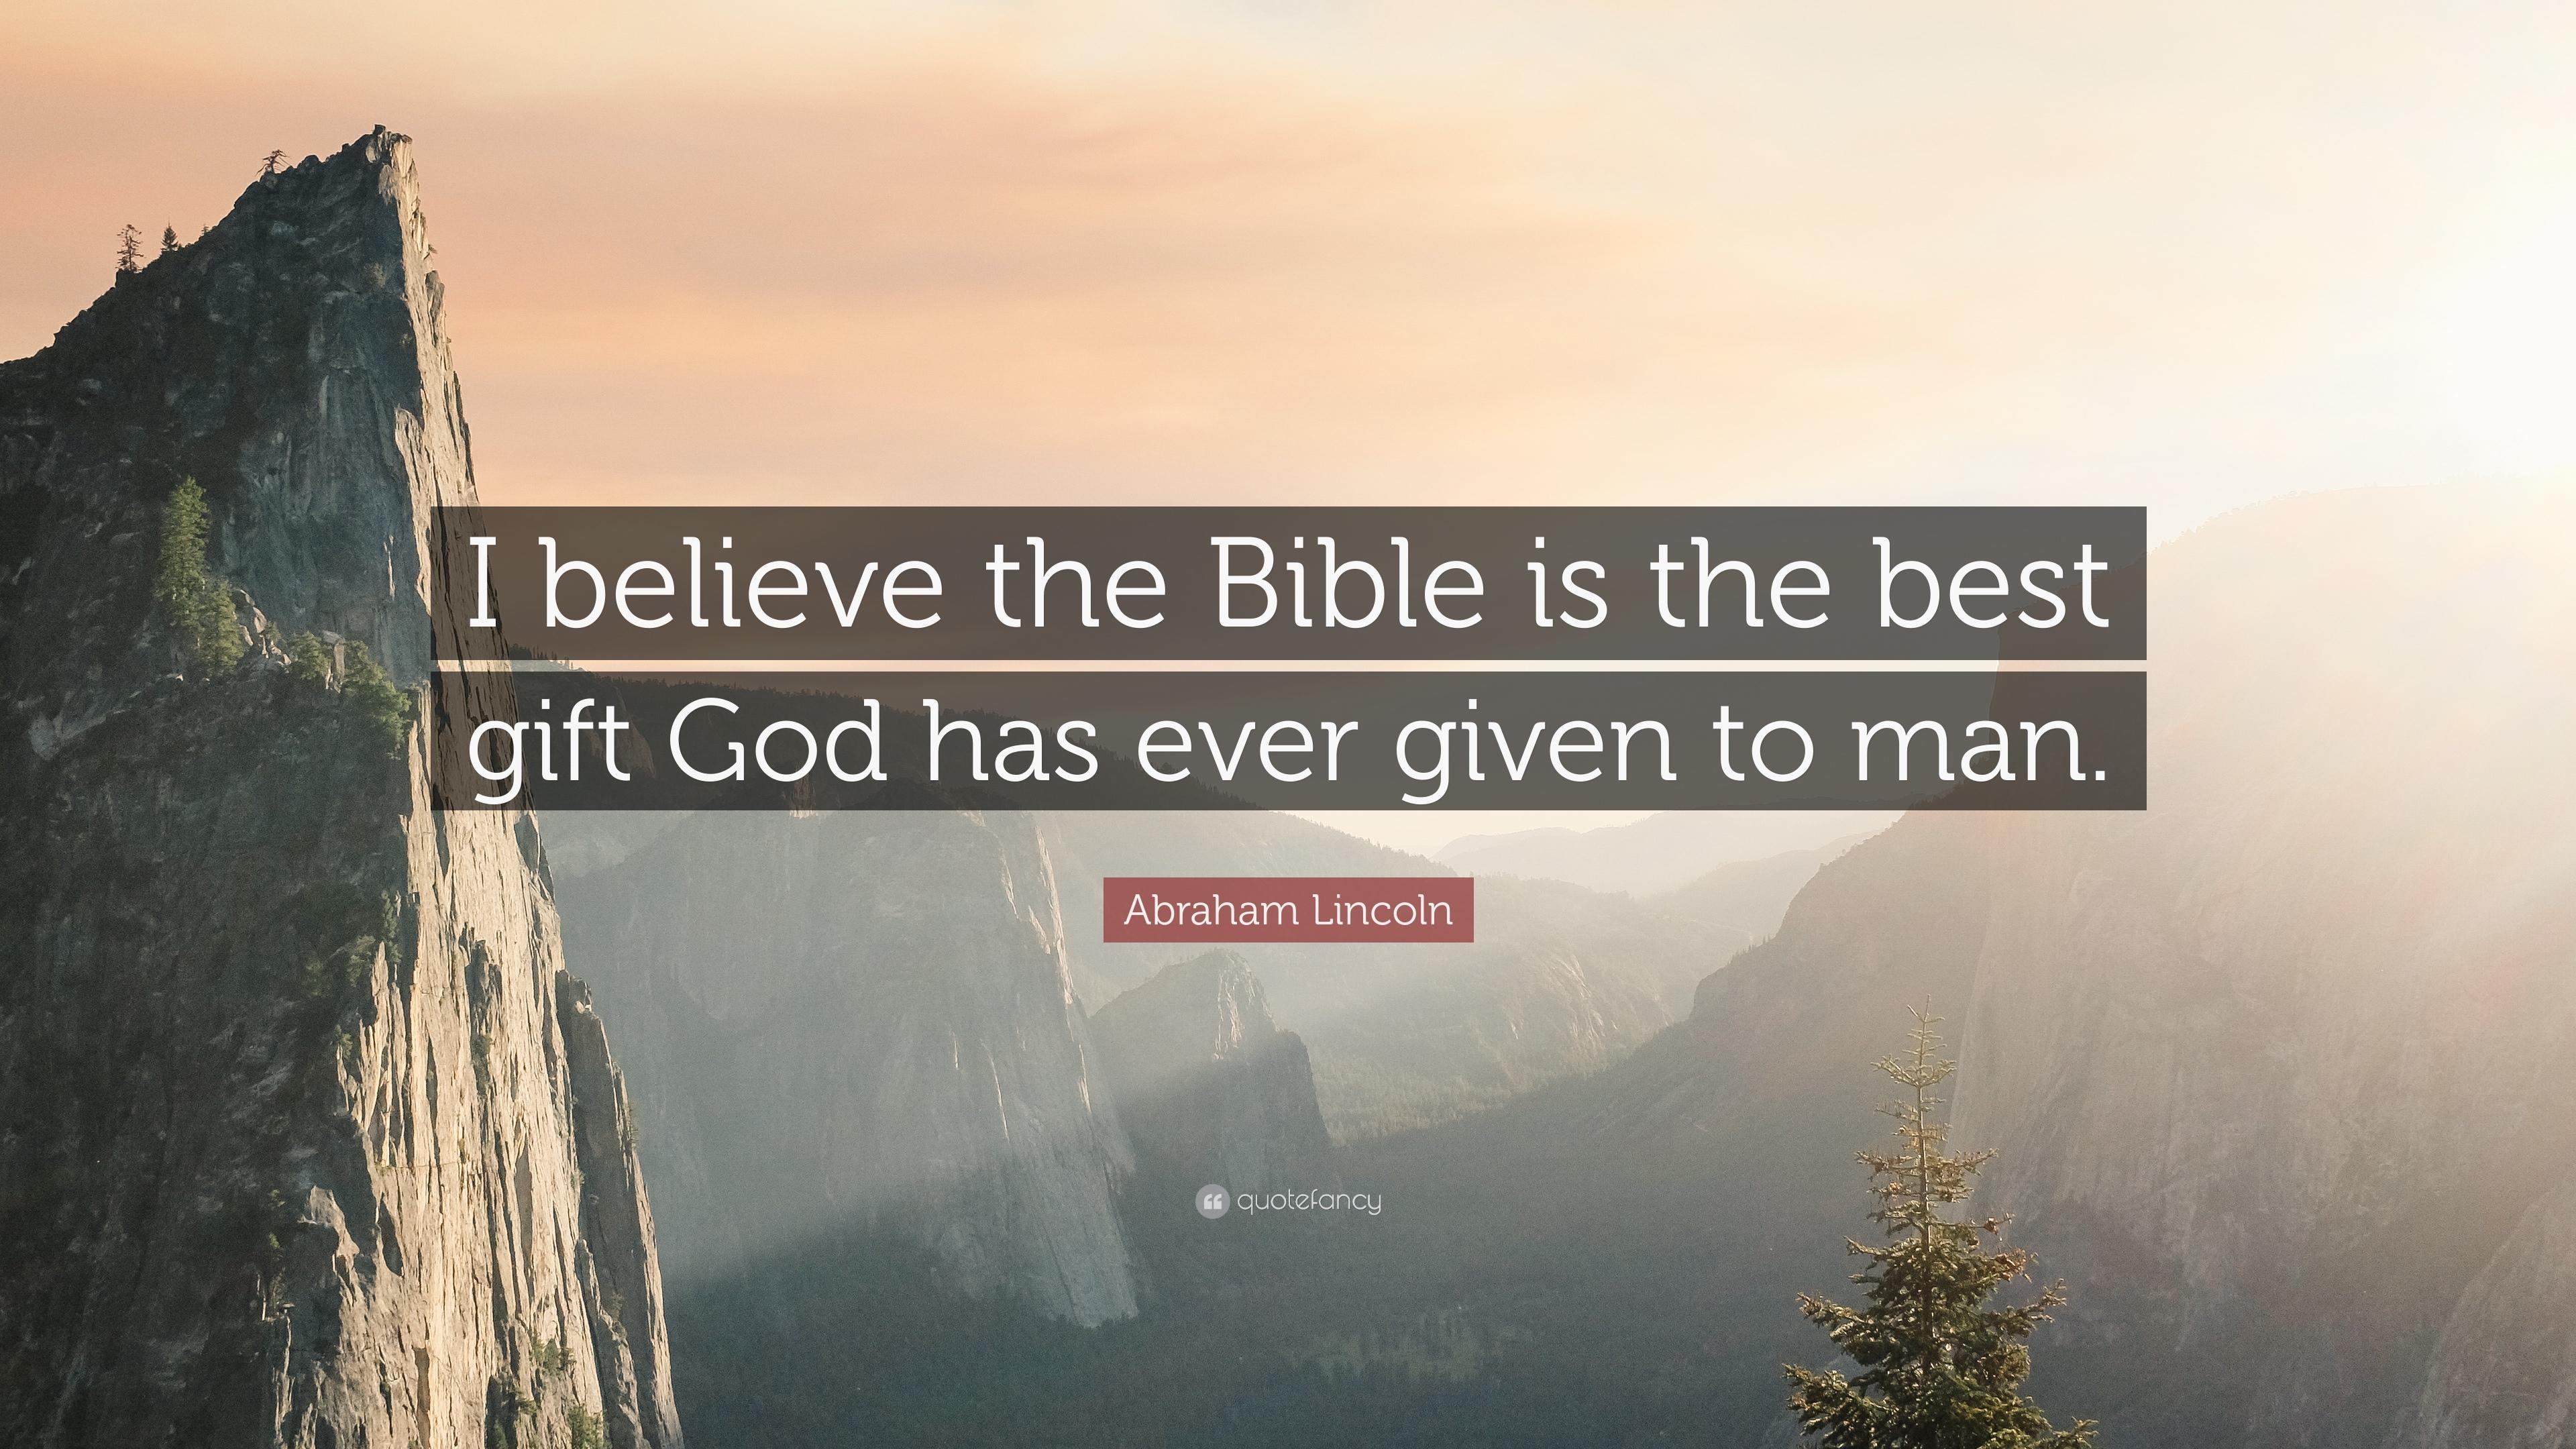 Abraham Lincoln Quote: “I believe the Bible is the best gift God has